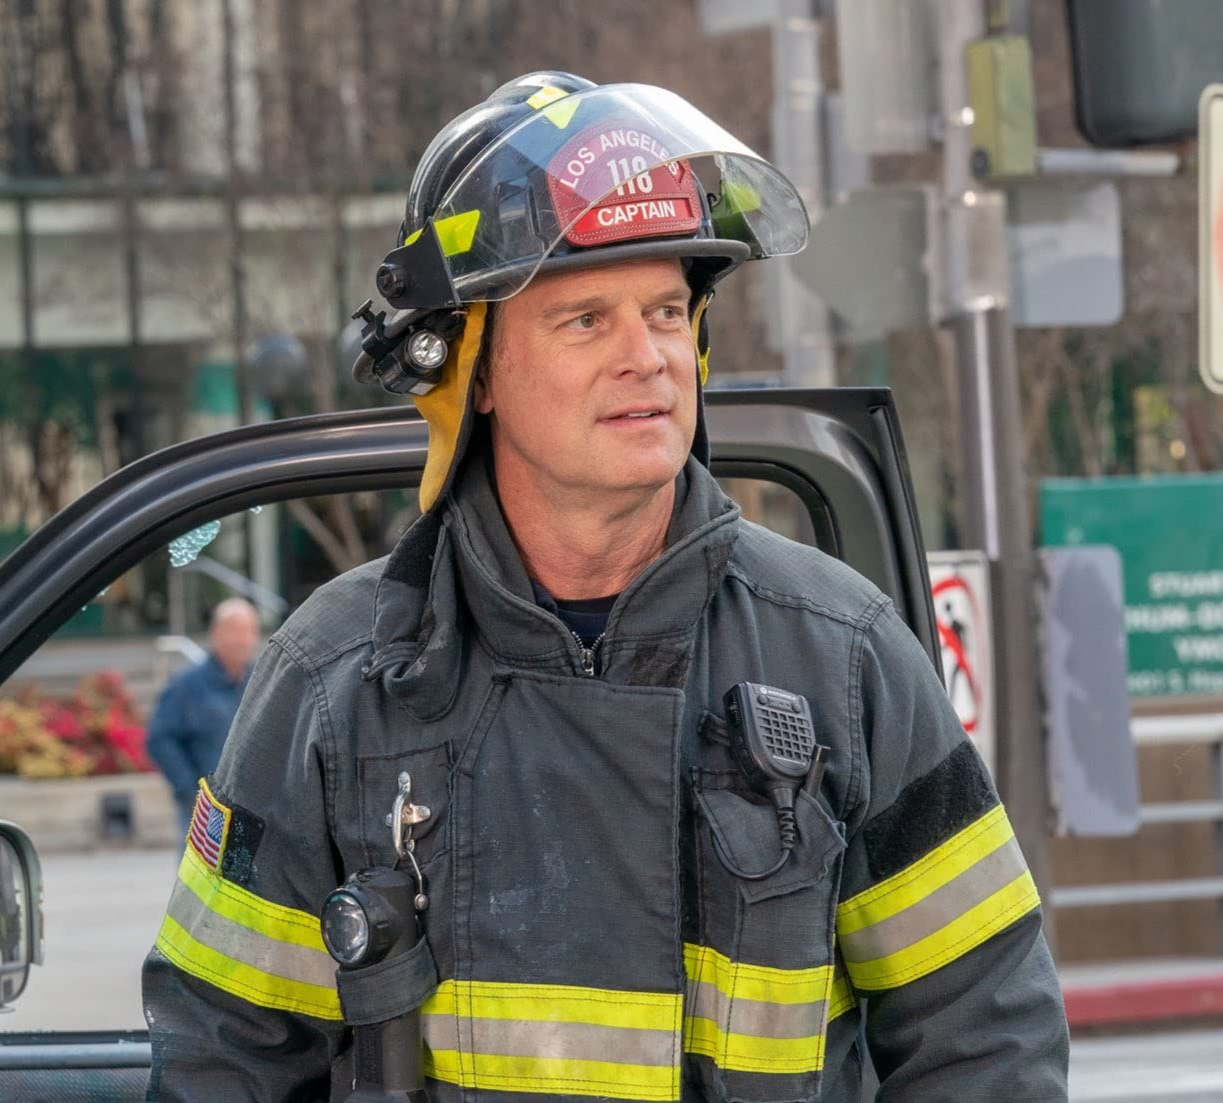 Peter Krause in 9-1-1 S01E17